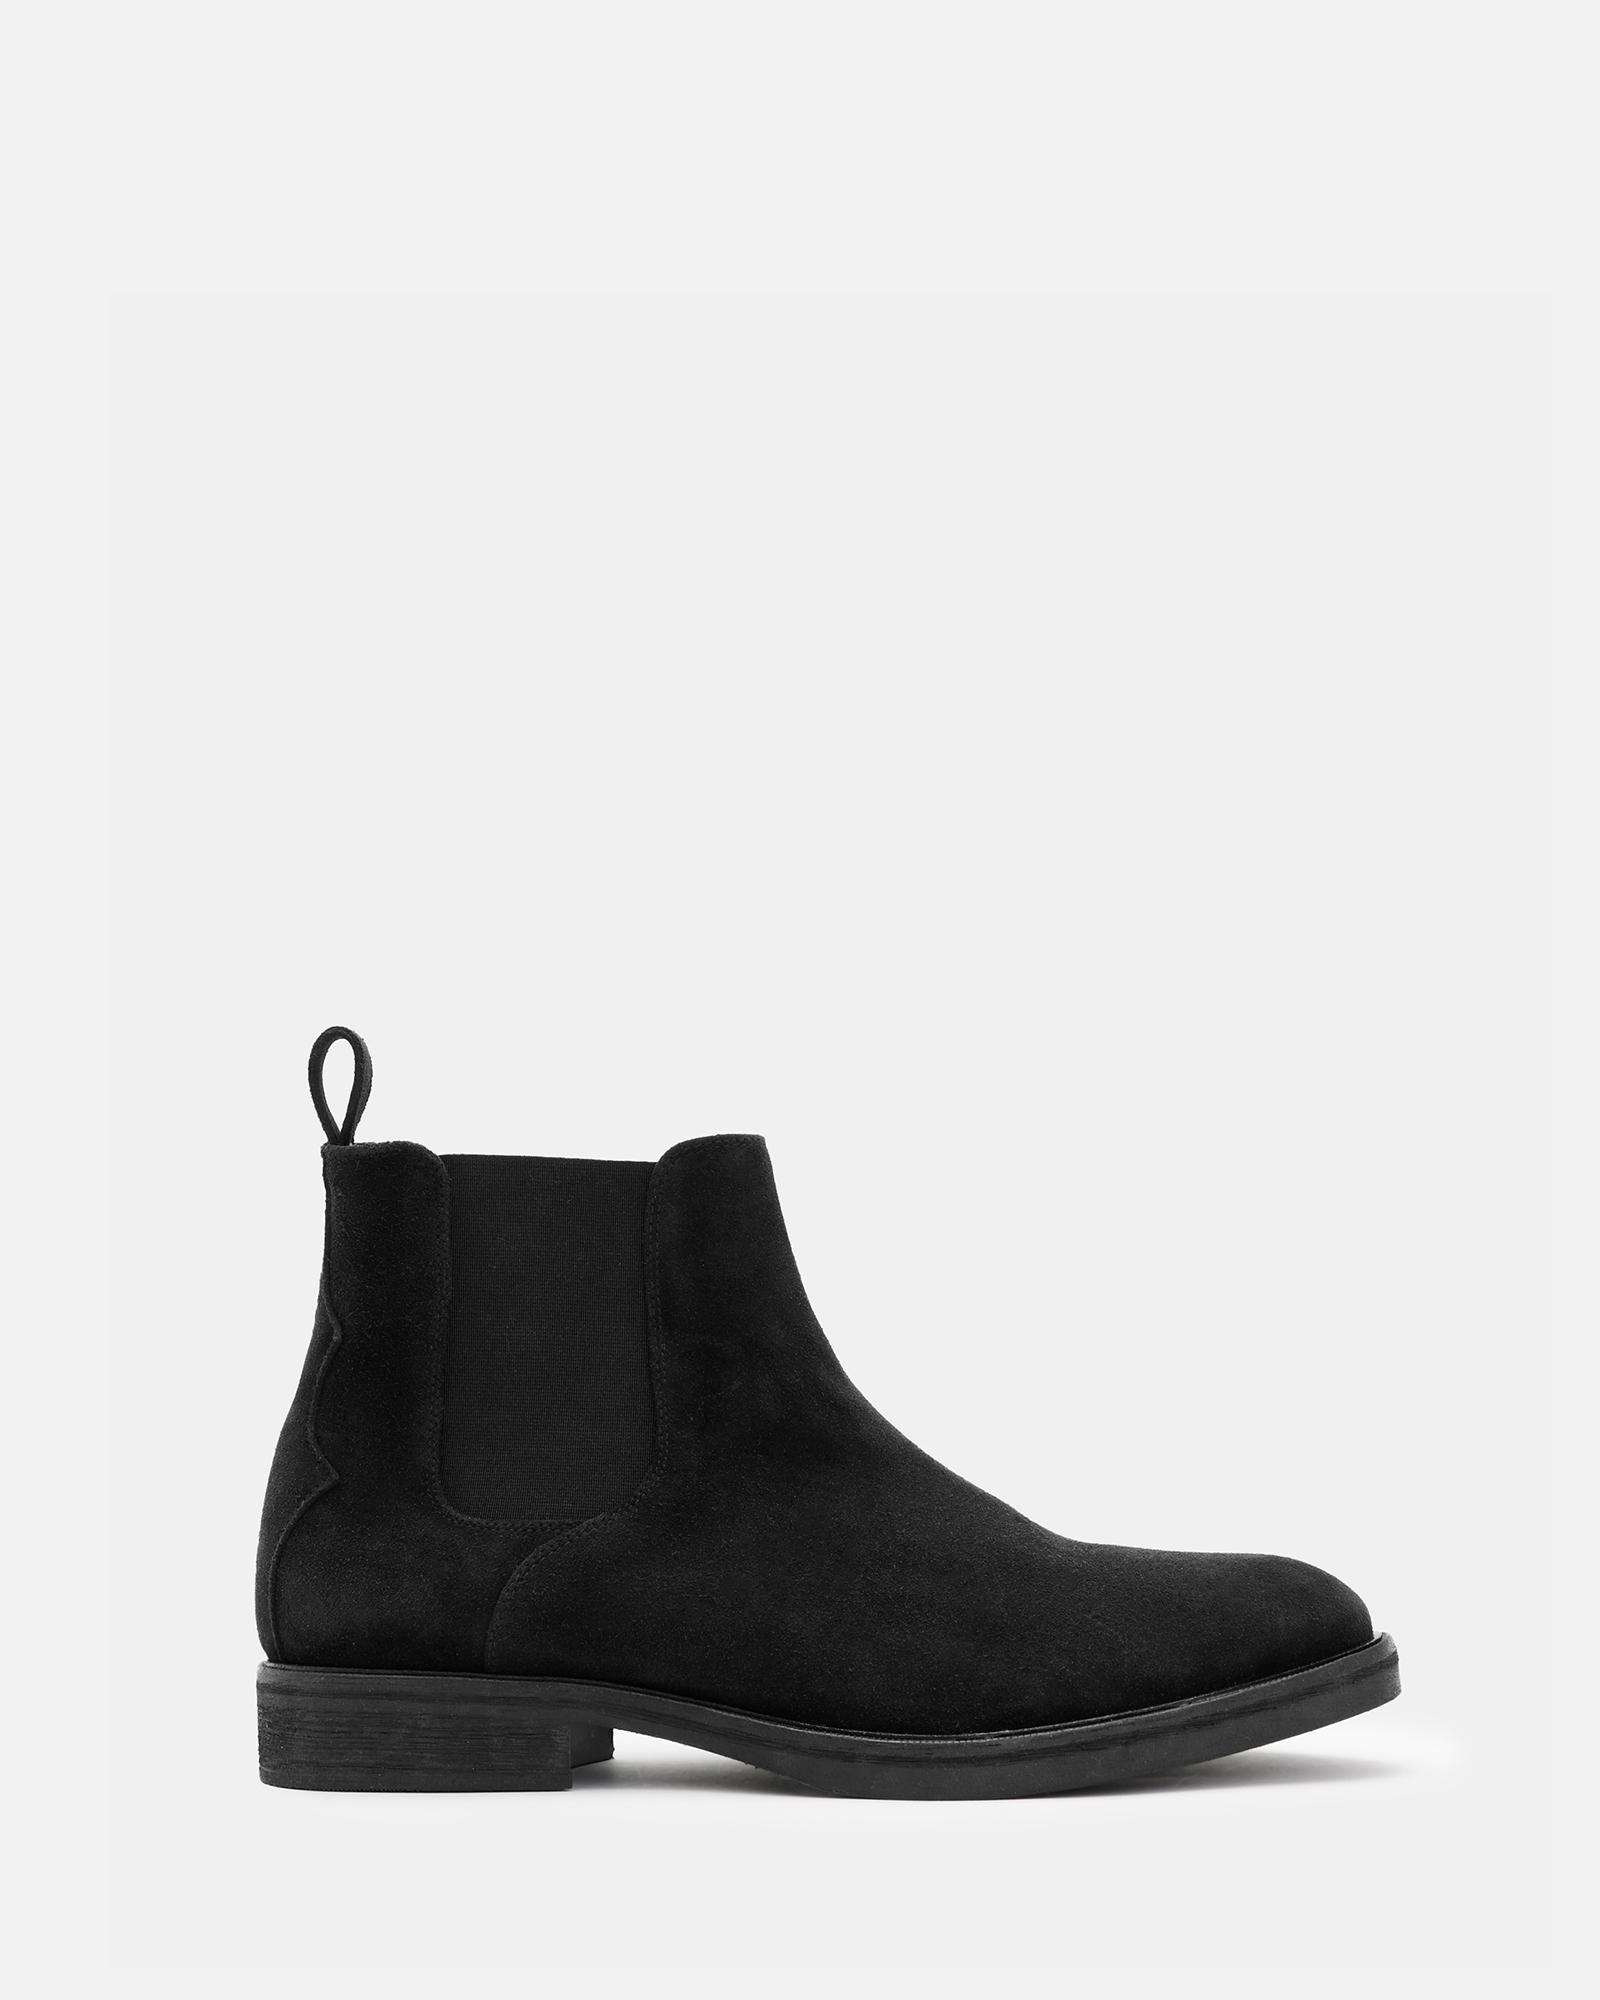 Shop Allsaints Creed Suede Chelsea Boots, In Black